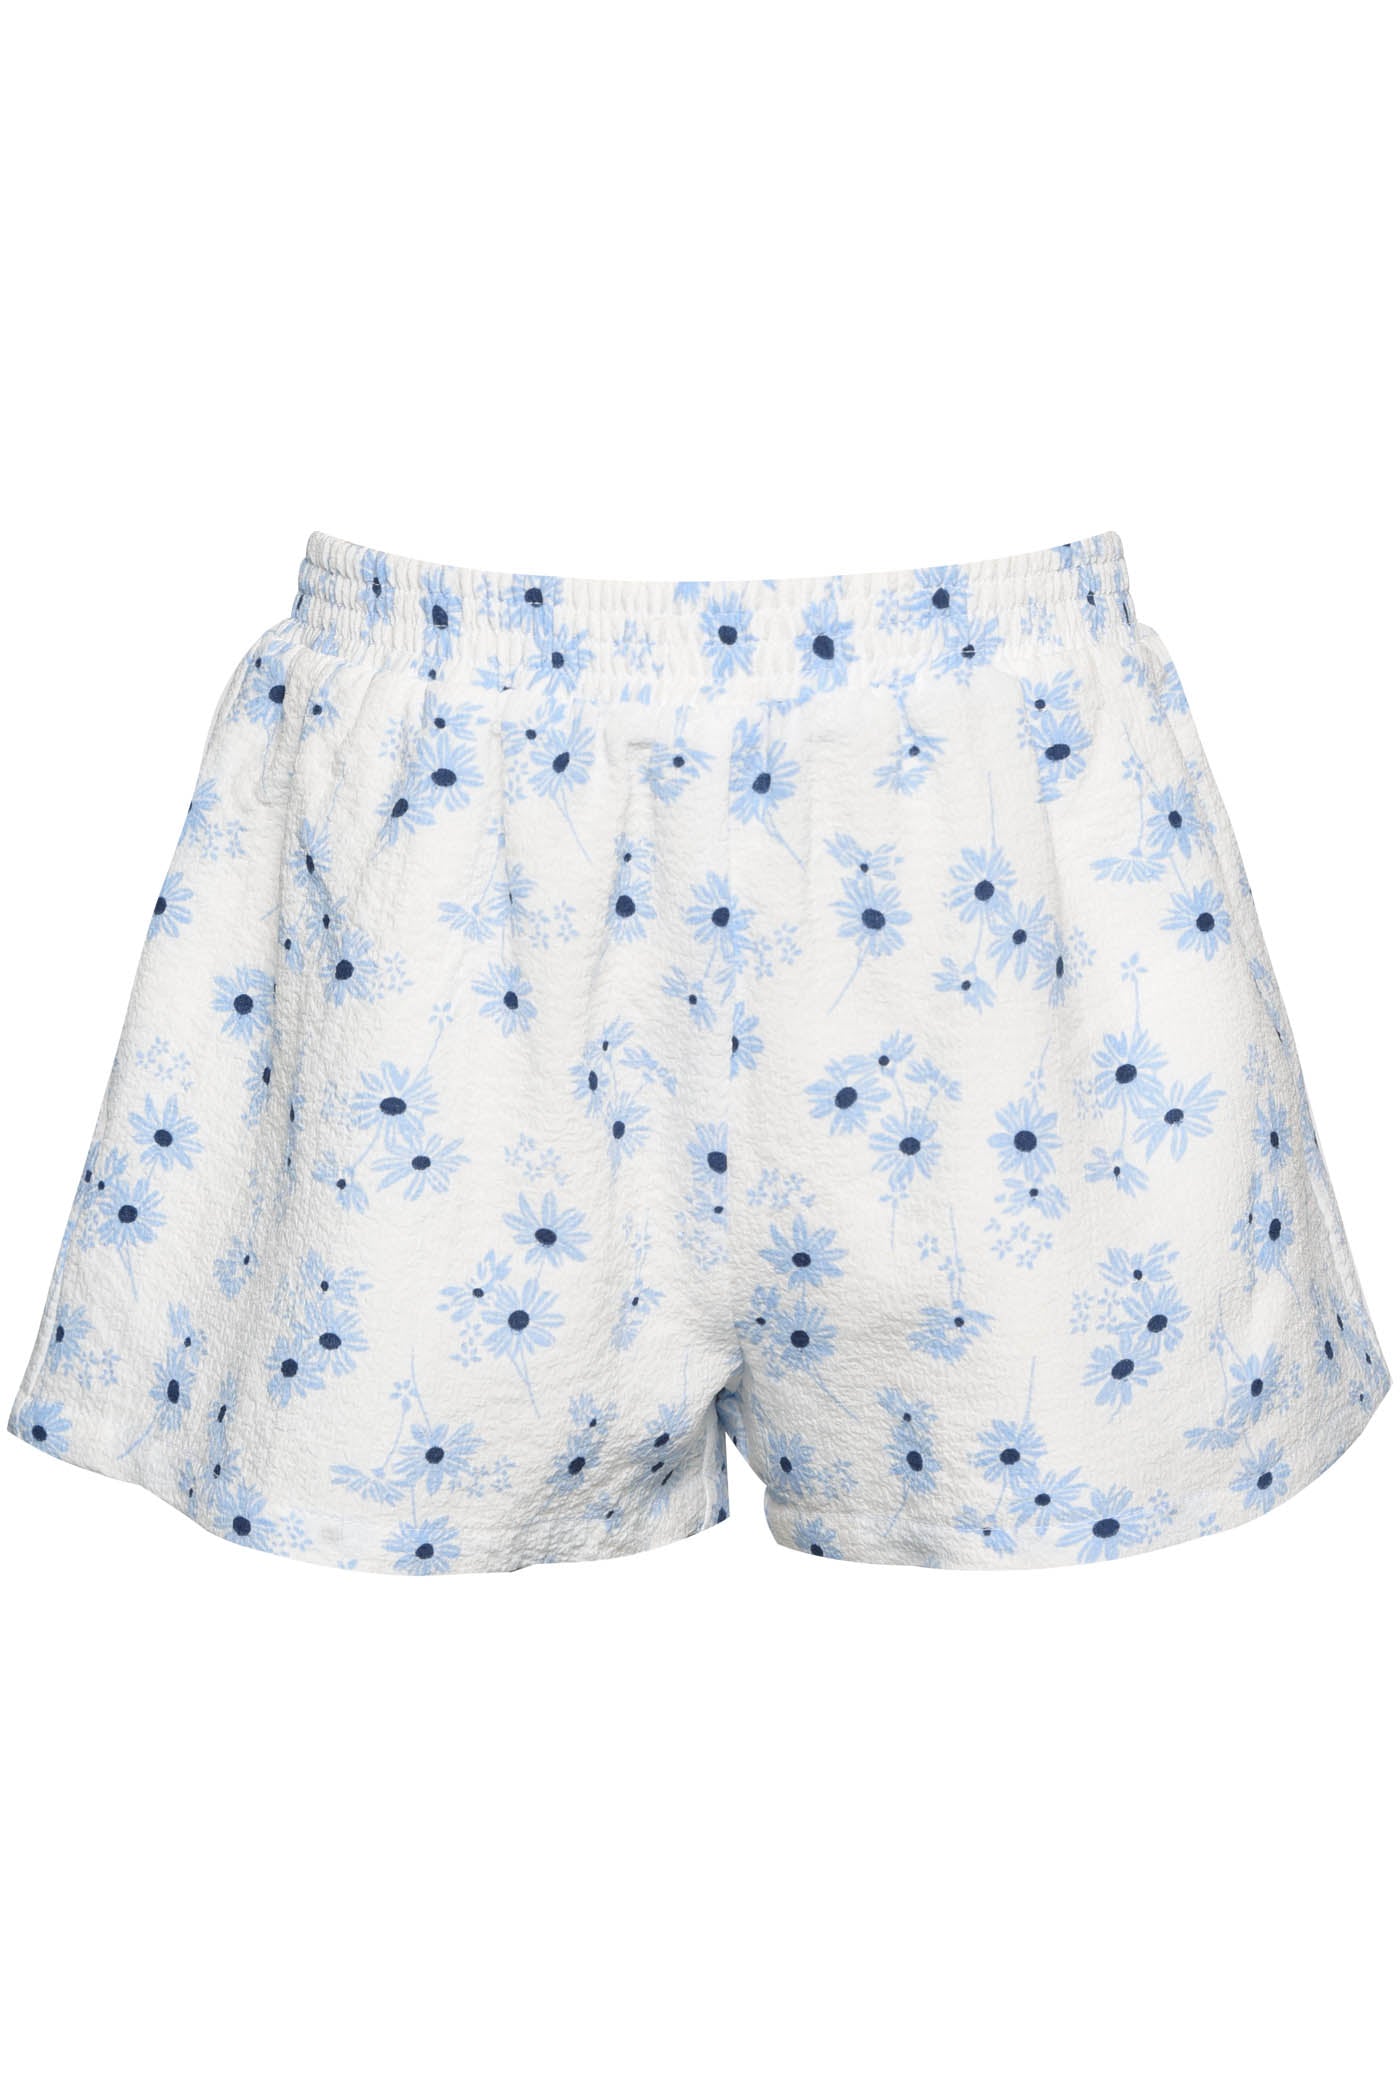 Floral Printed Shorts, White with Blue Flowers